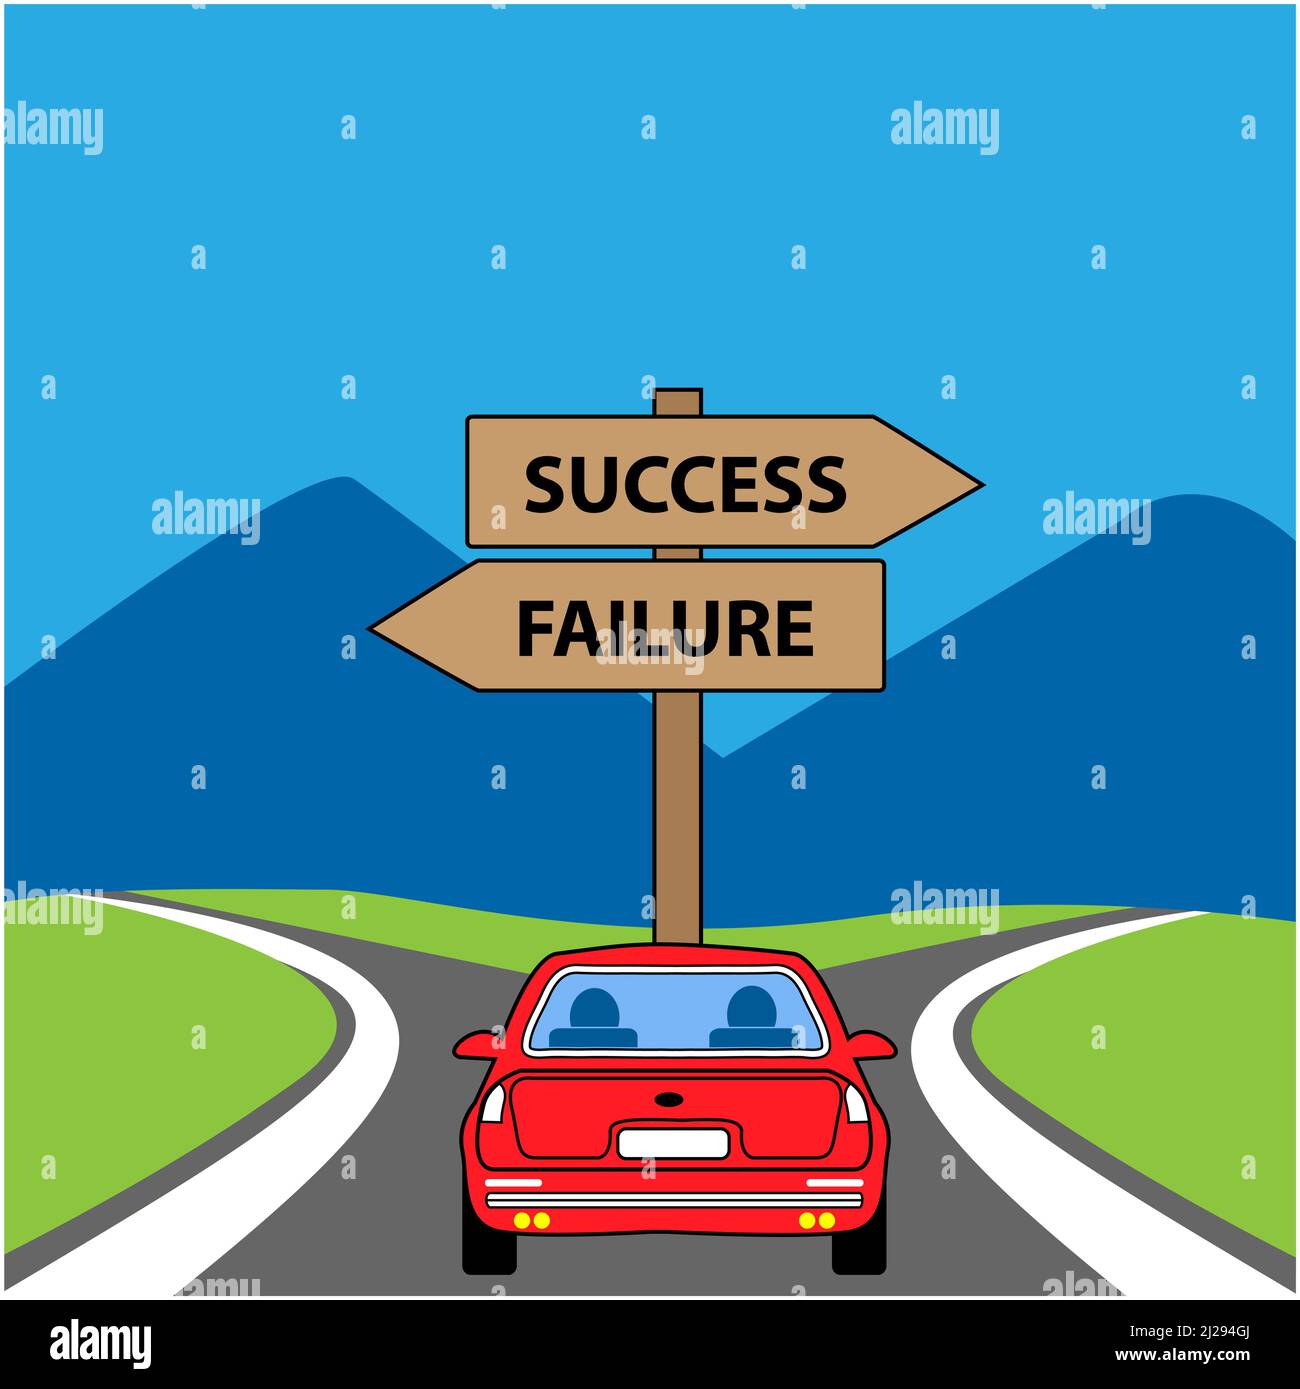 Success concept. Wooden sign indicating the direction of success and failure. Stock Vector